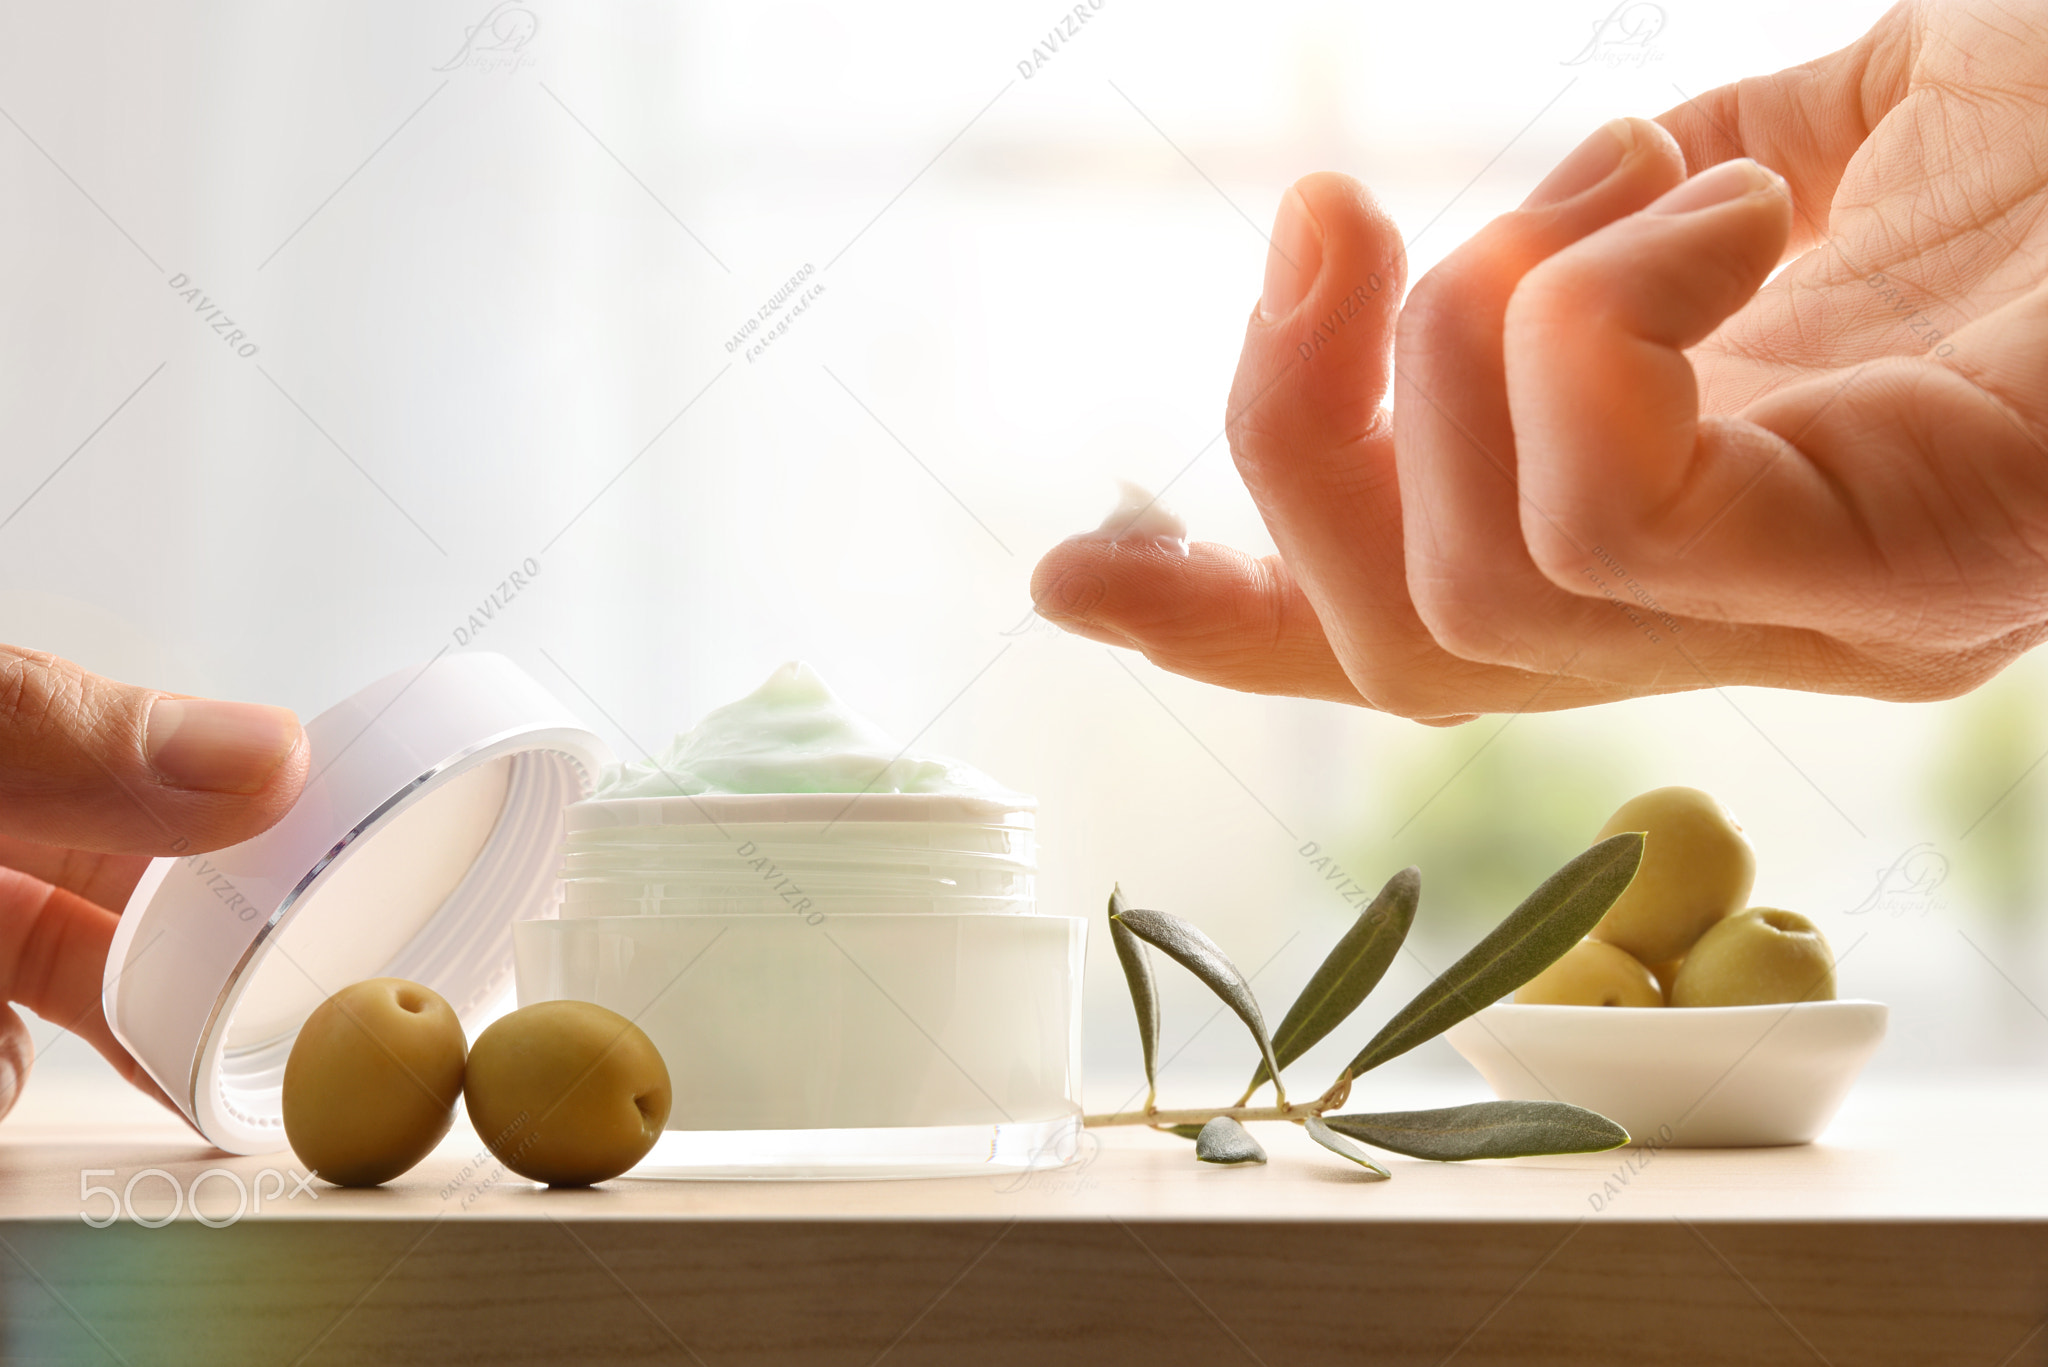 Hands taking sample of olive body cream on wooden table